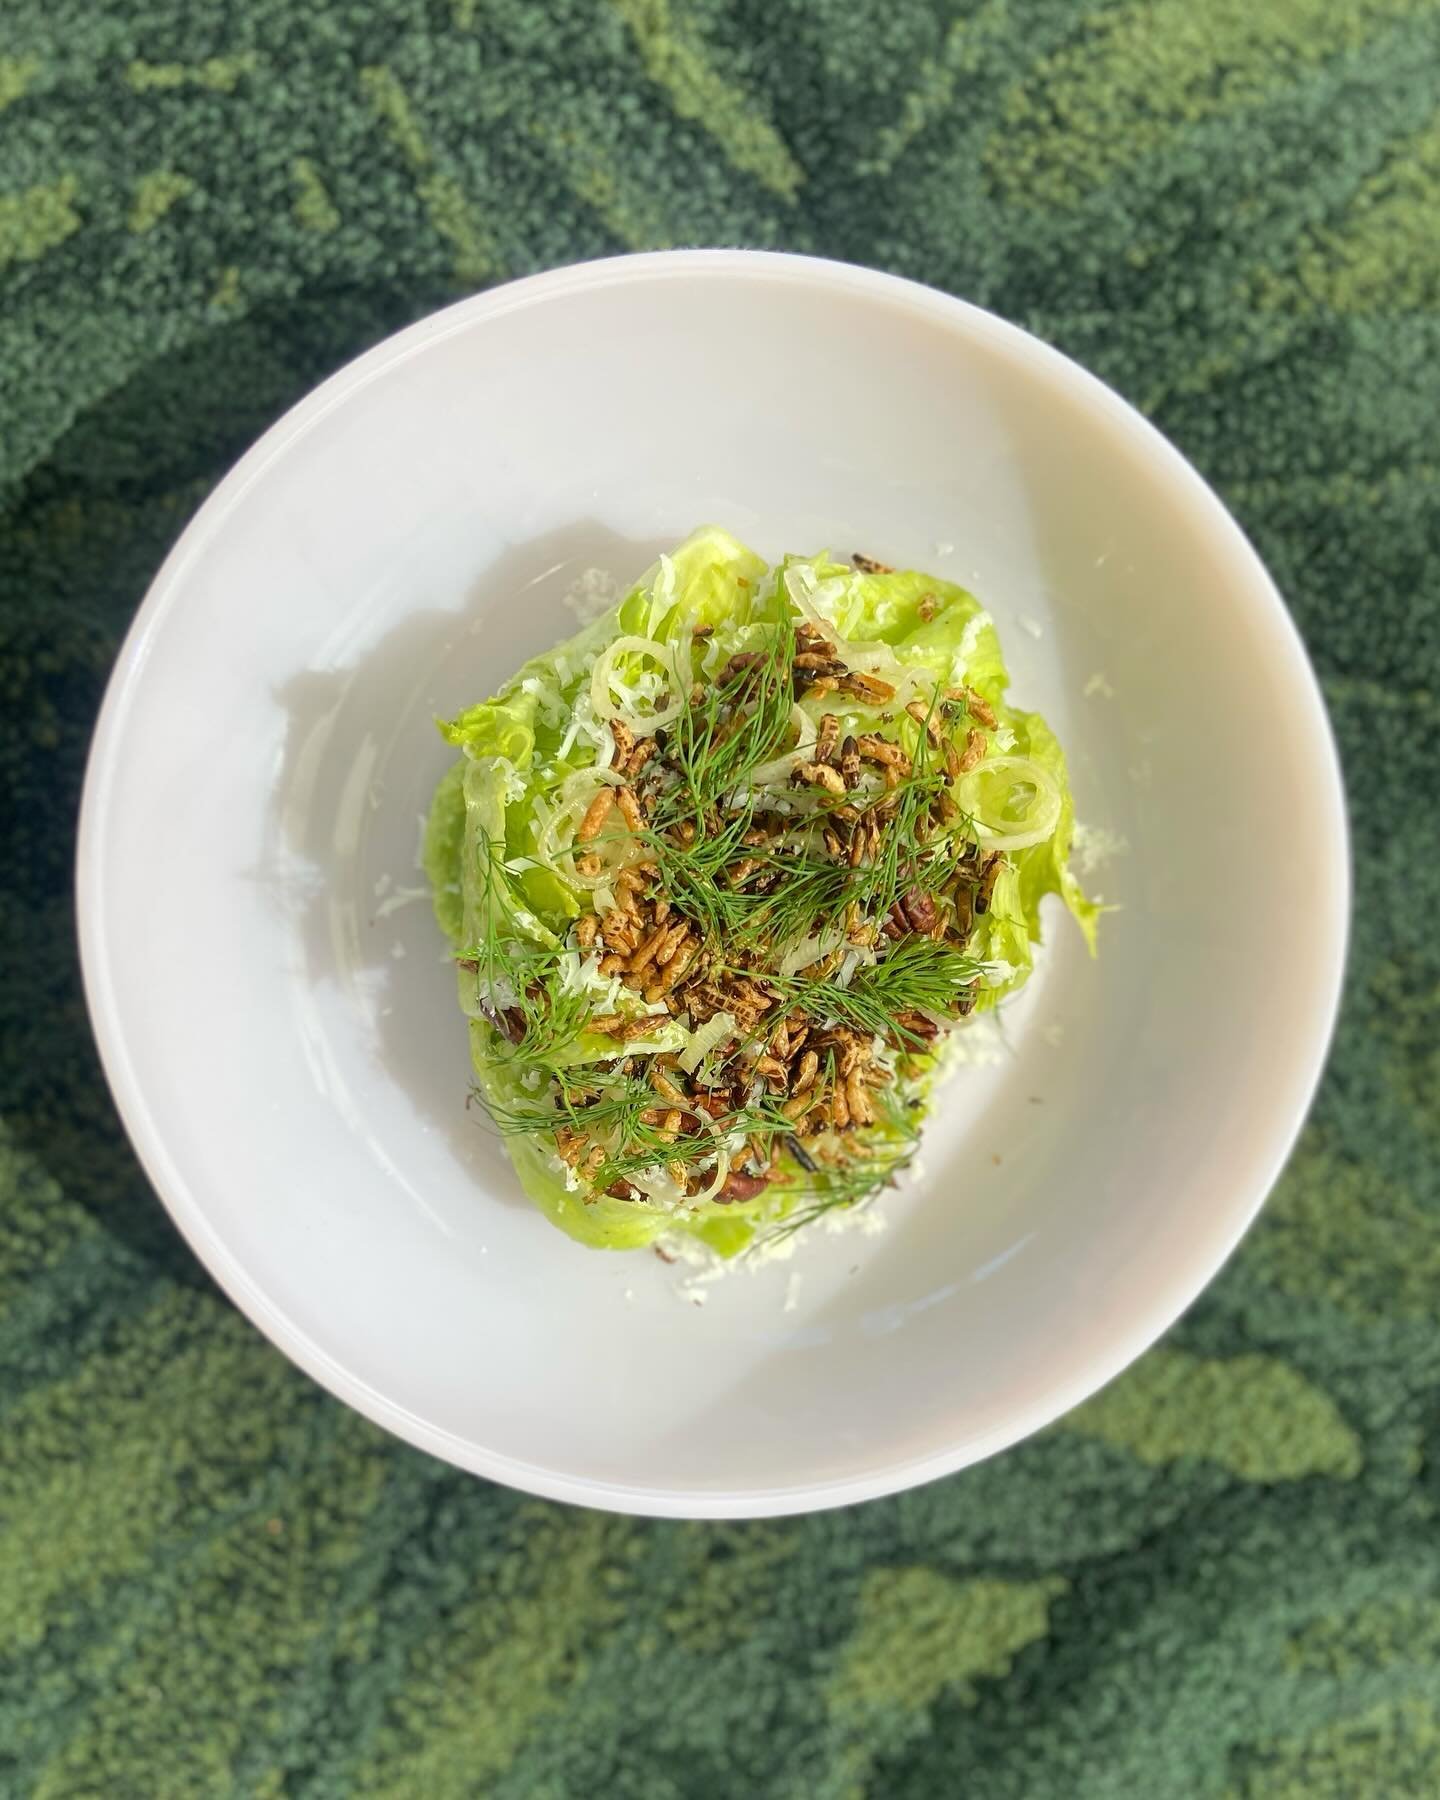 New Salad on the Menu for today:
@full_belly_farm Ice Berg Wedge
Fava Bean Dip, Green Garlic Dressing, Tiny Pecans
Cabrillo Cheese @stepladdercreamery, Puffed Wild Rice Dill
*
Modern #funluxury